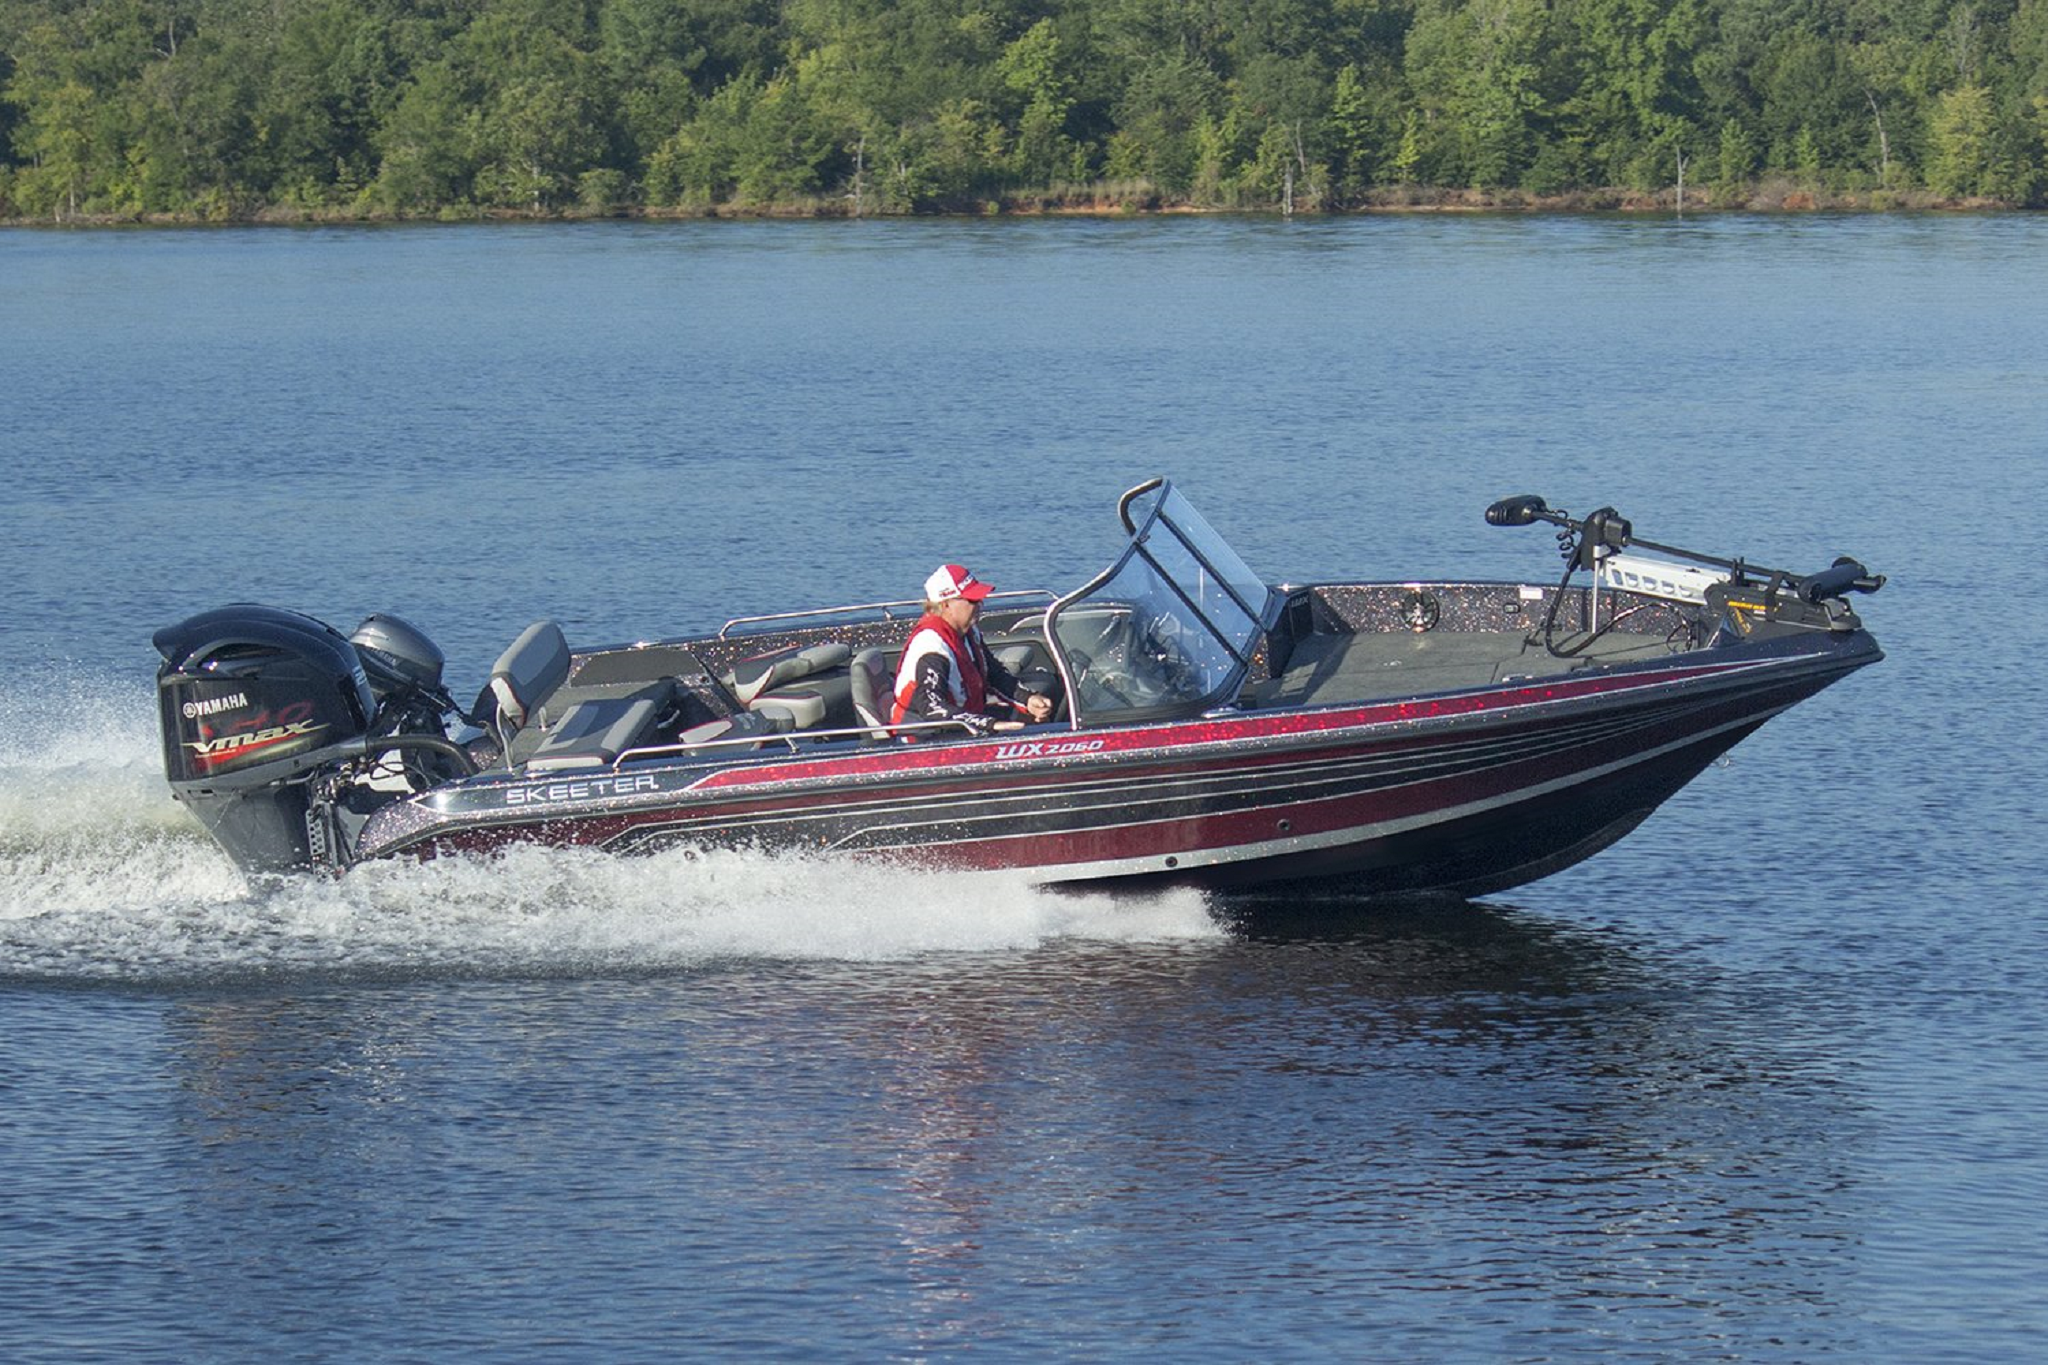 A Look at the Skeeter WX2060 Fishing Boat - BEST OF BOATING